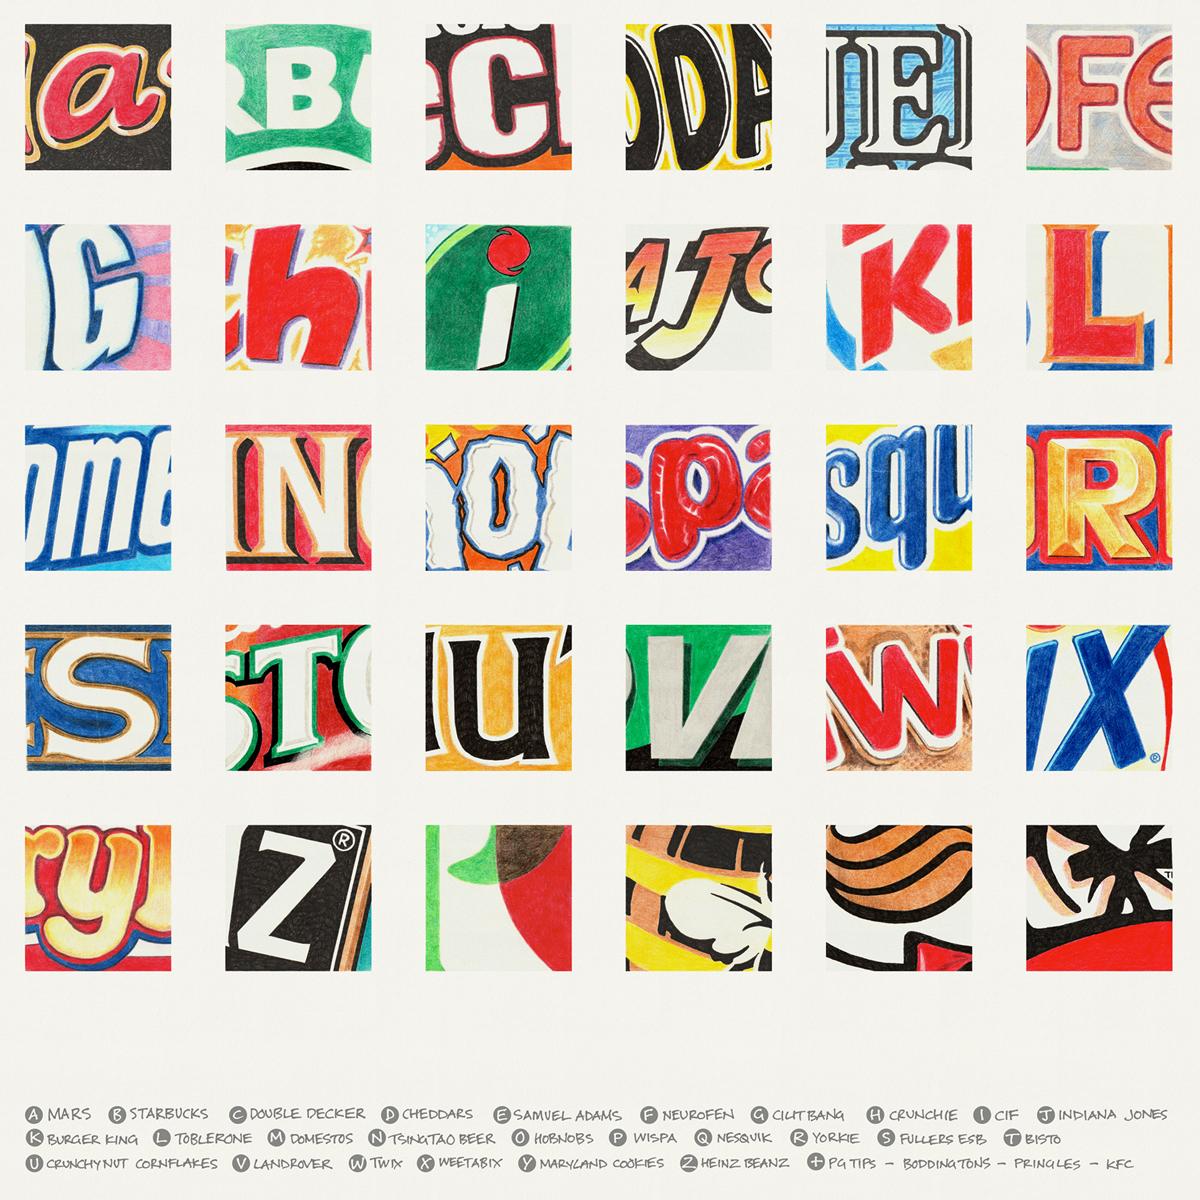 Limited edition print, a montage of letters from well-known brands